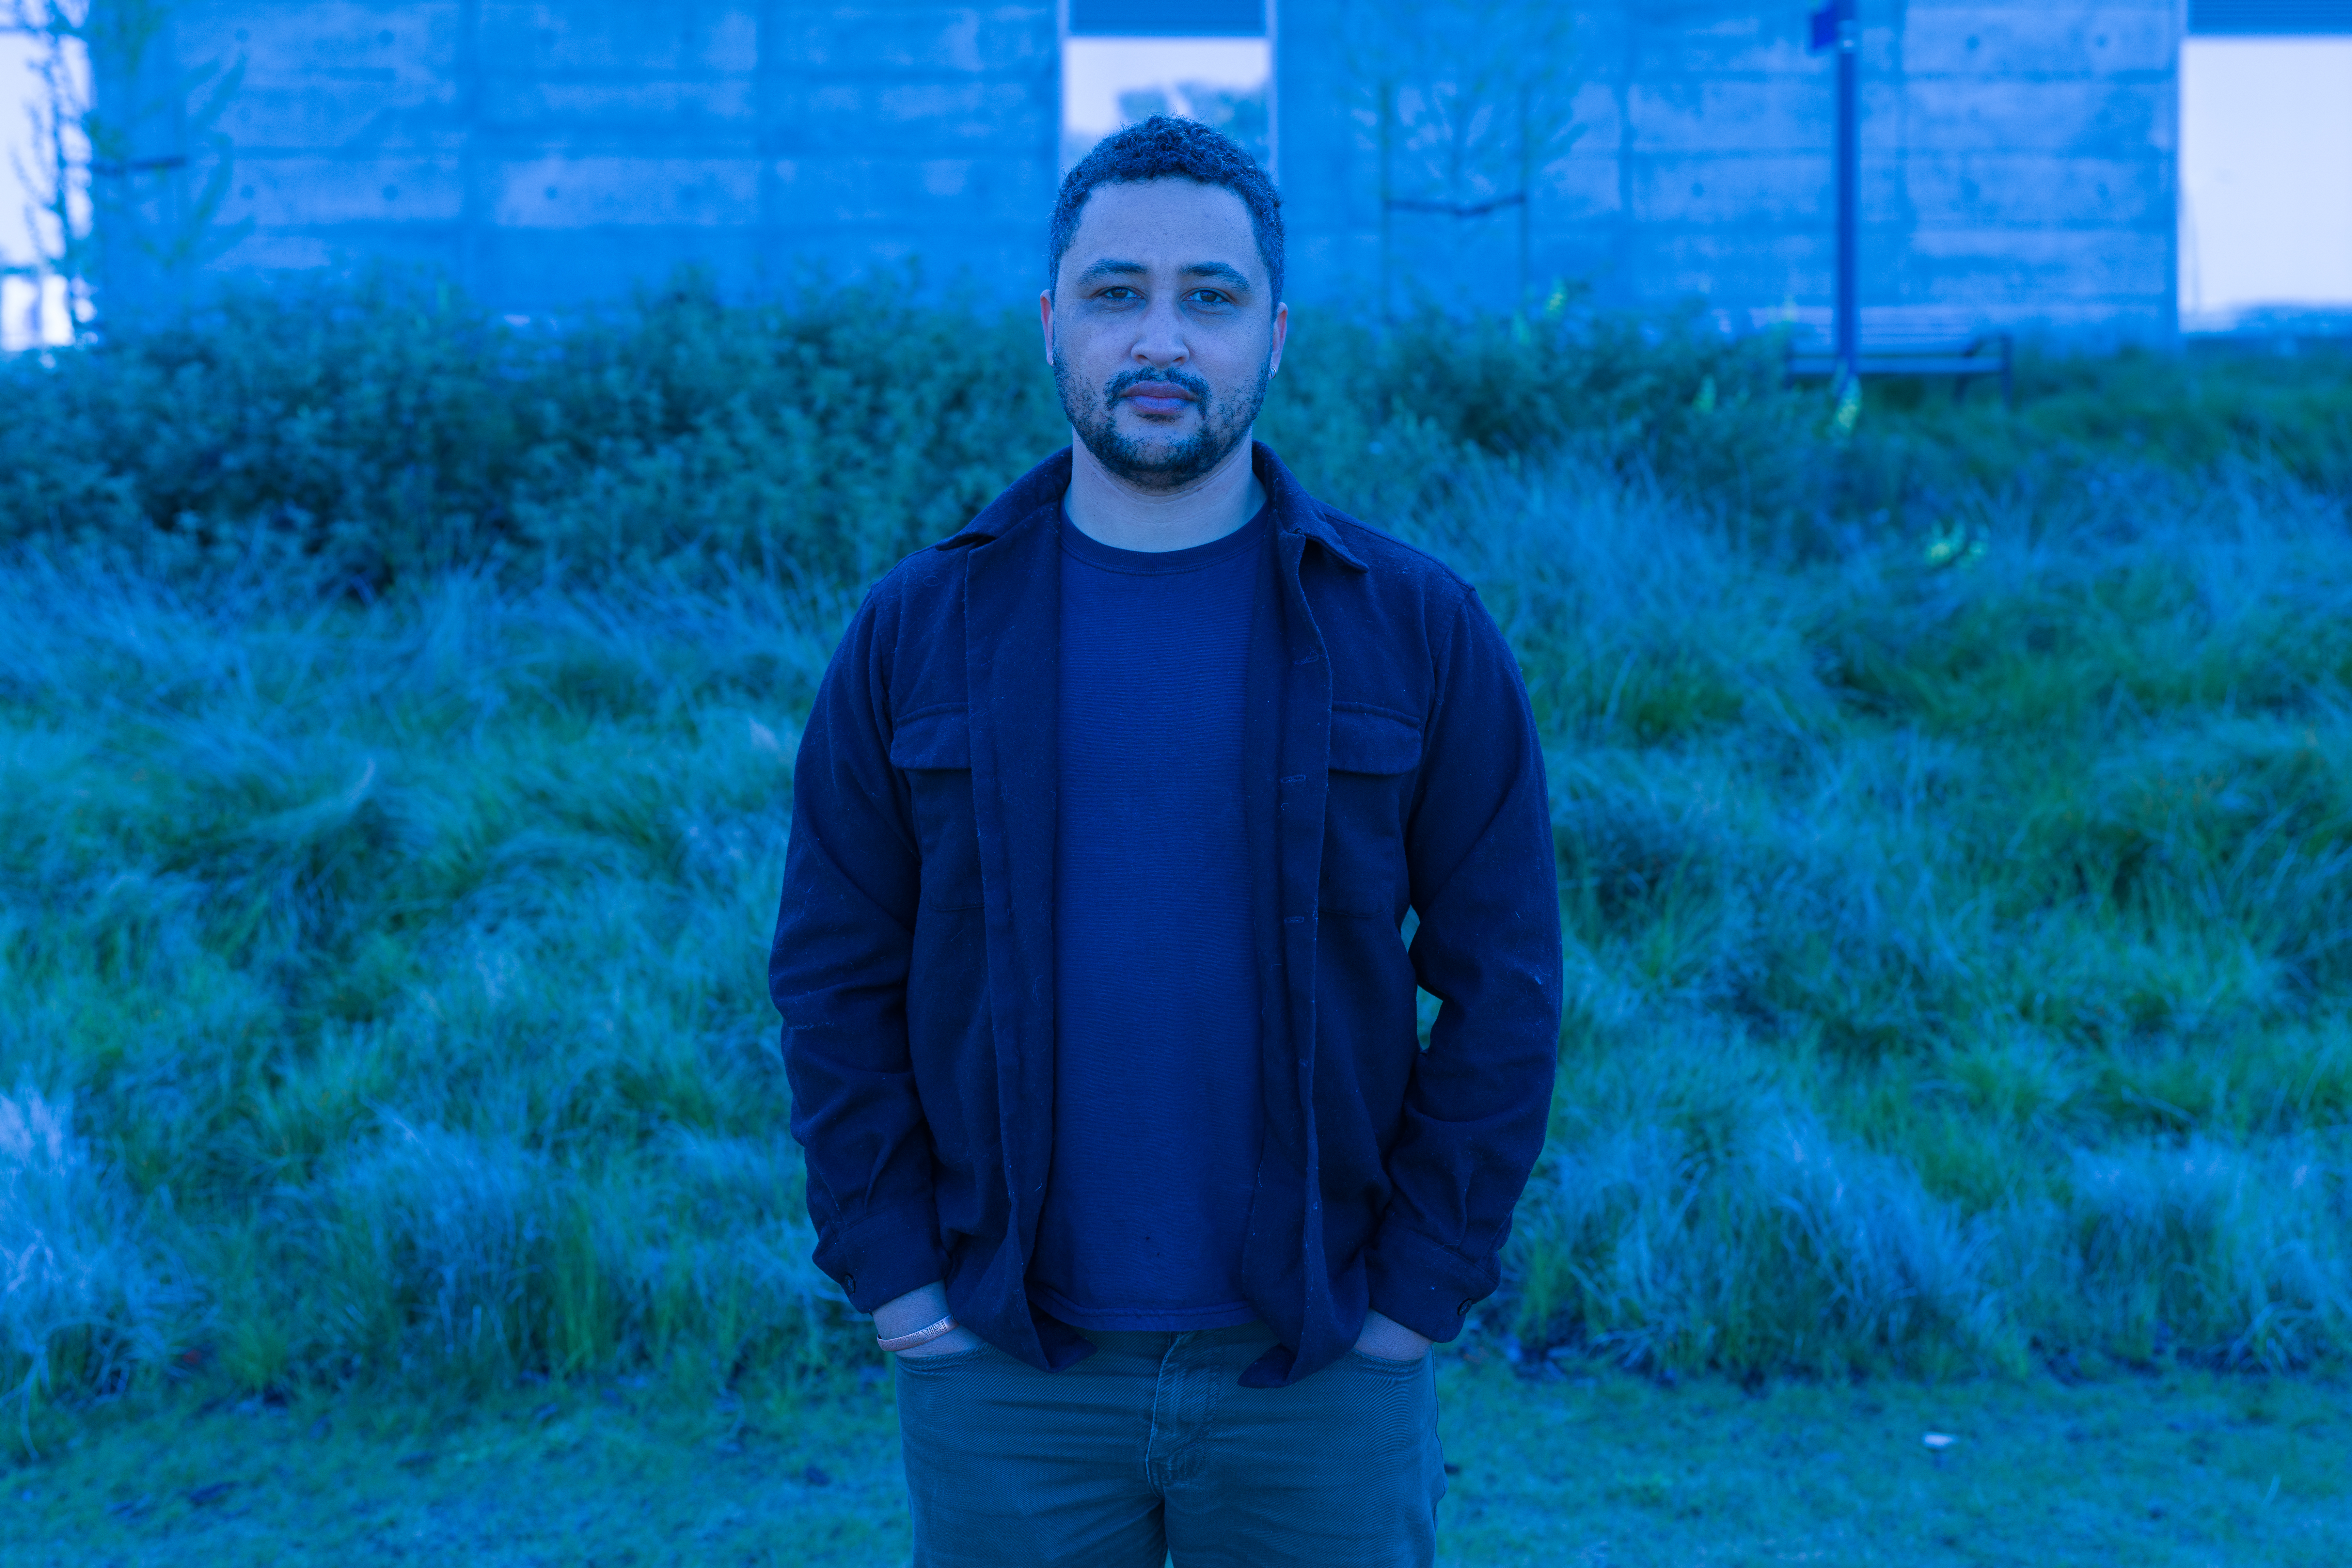 Man standing in front of a grassy hill and everything appears with a blue tint.